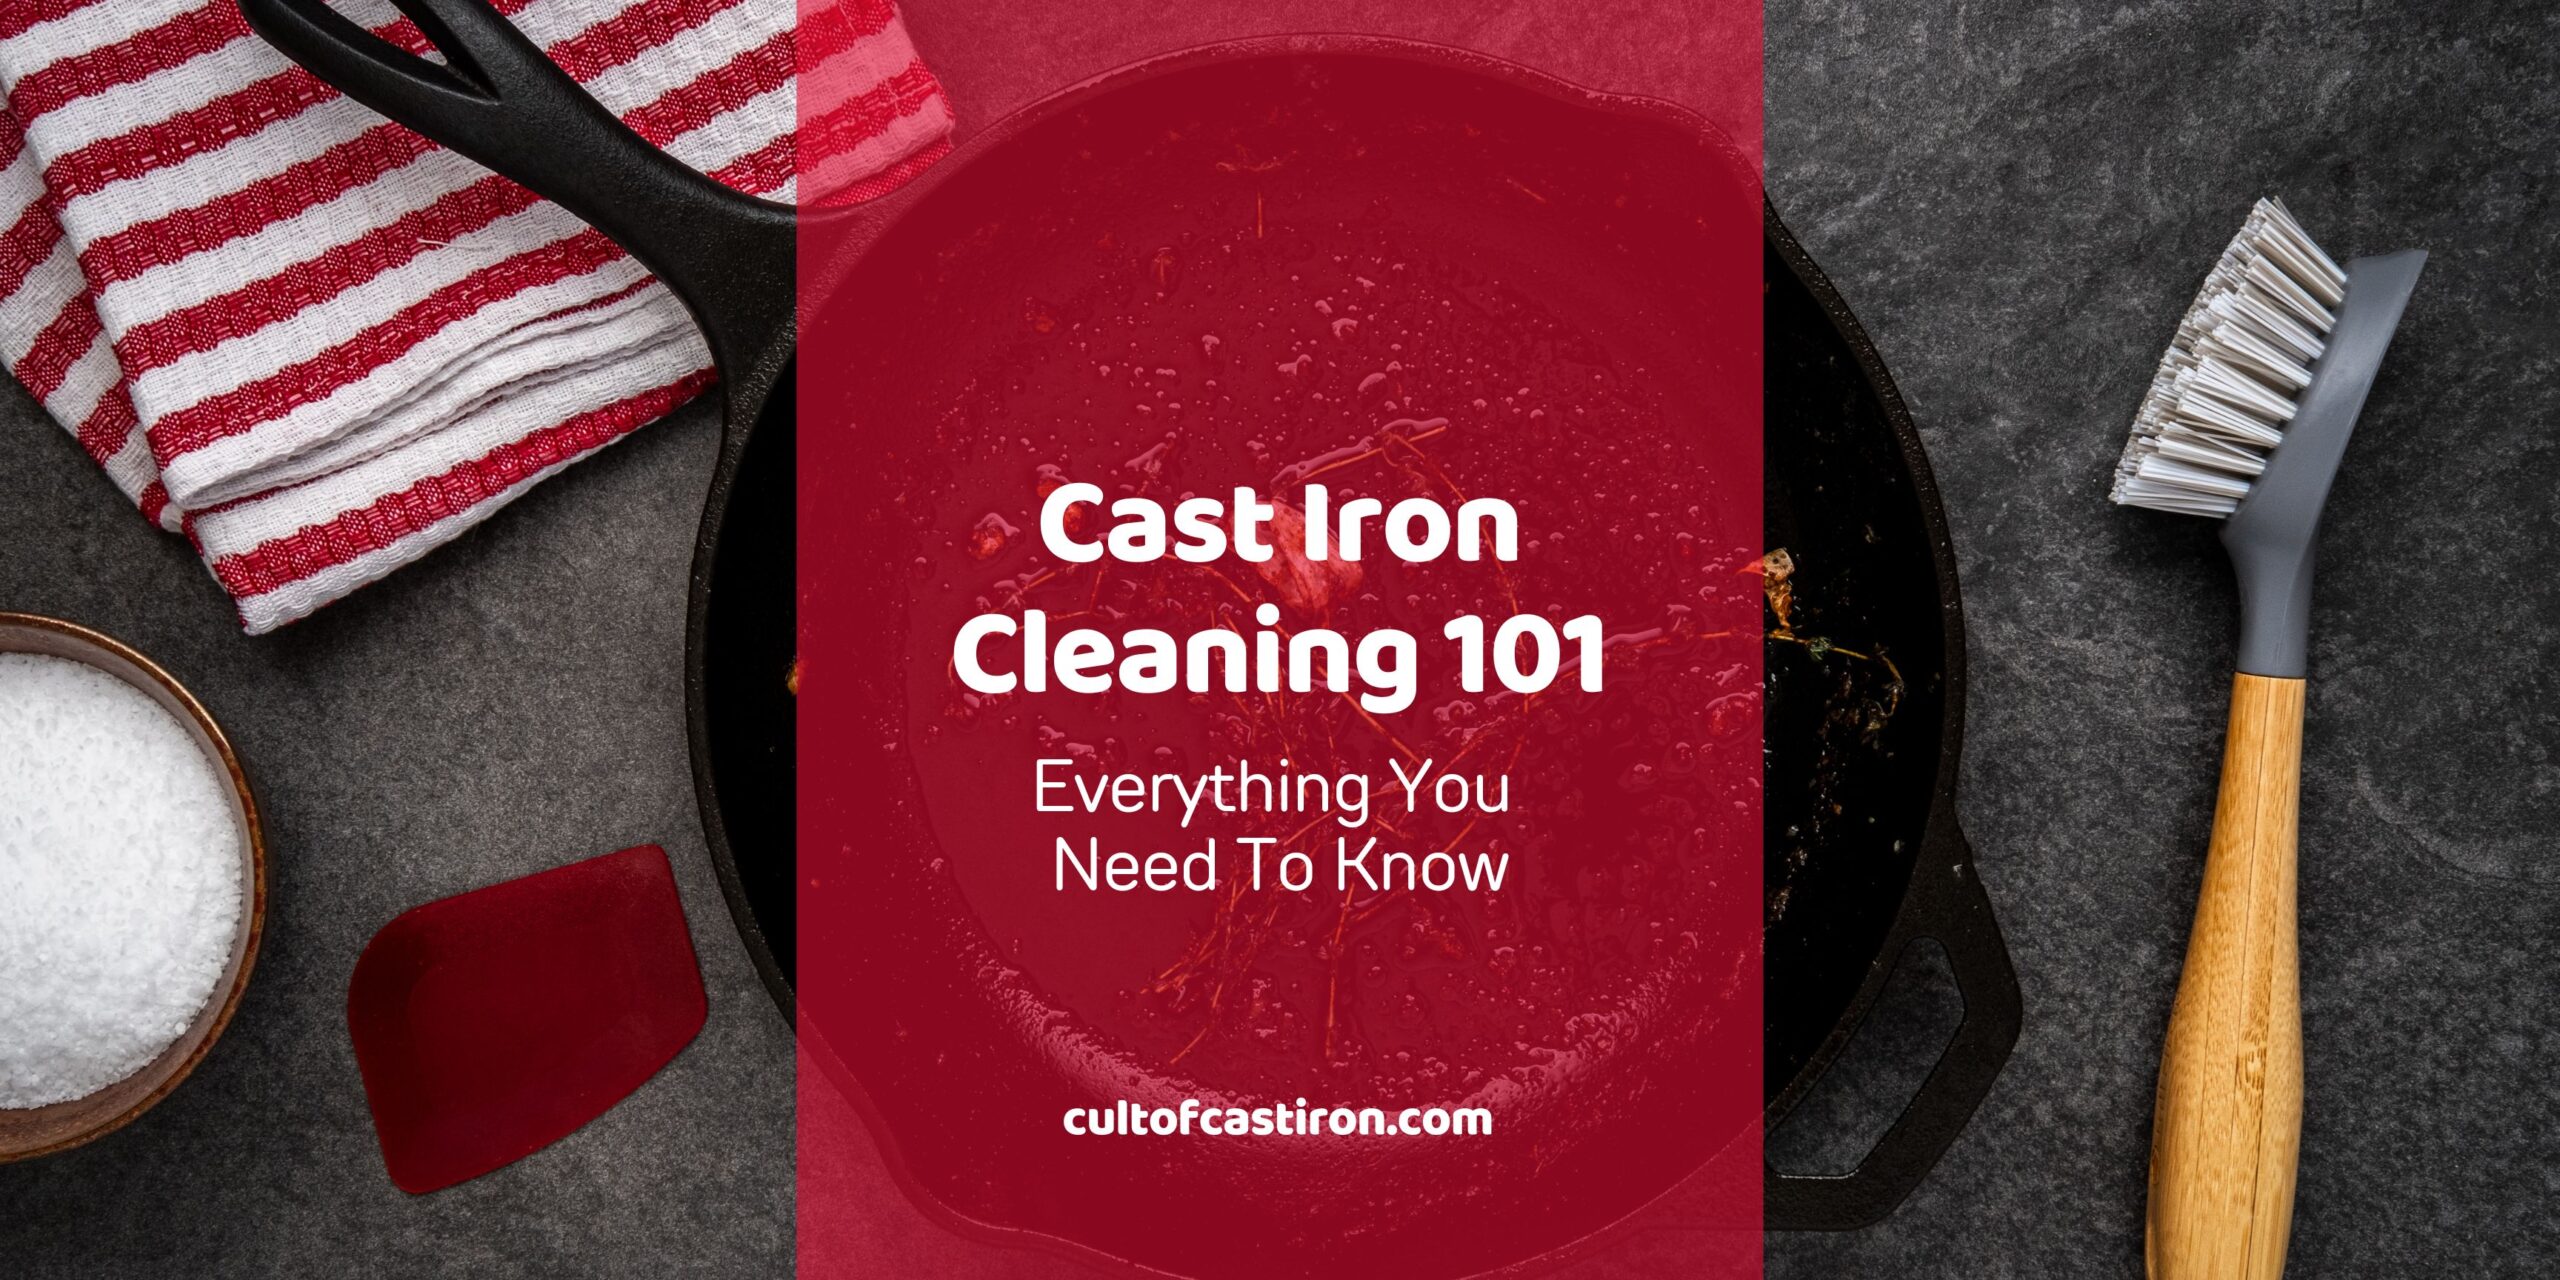 cast iron cleaning 101 banner